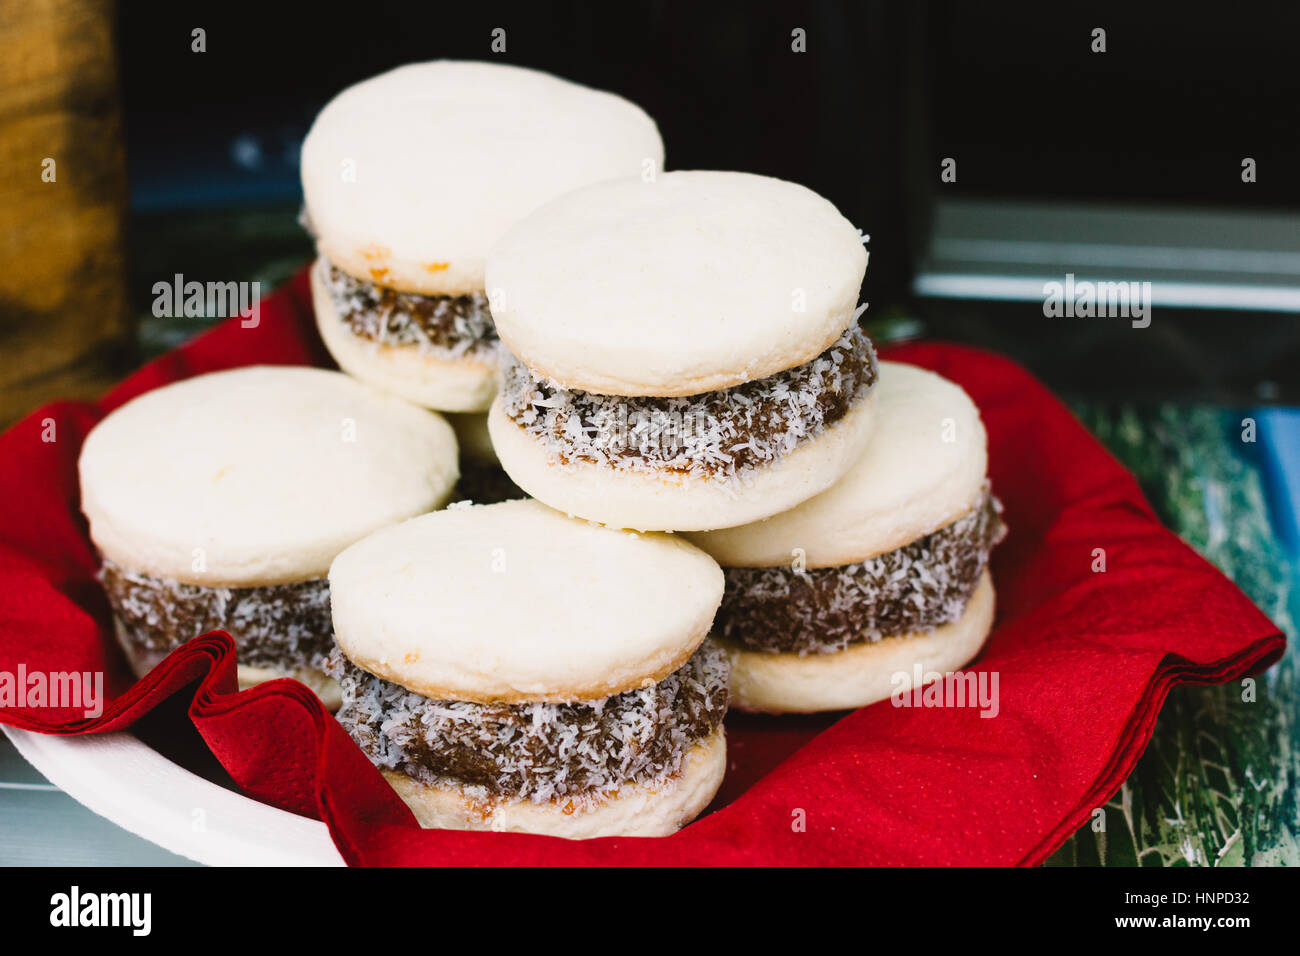 Homemade alfajores on a plate with a red napkin Stock Photo